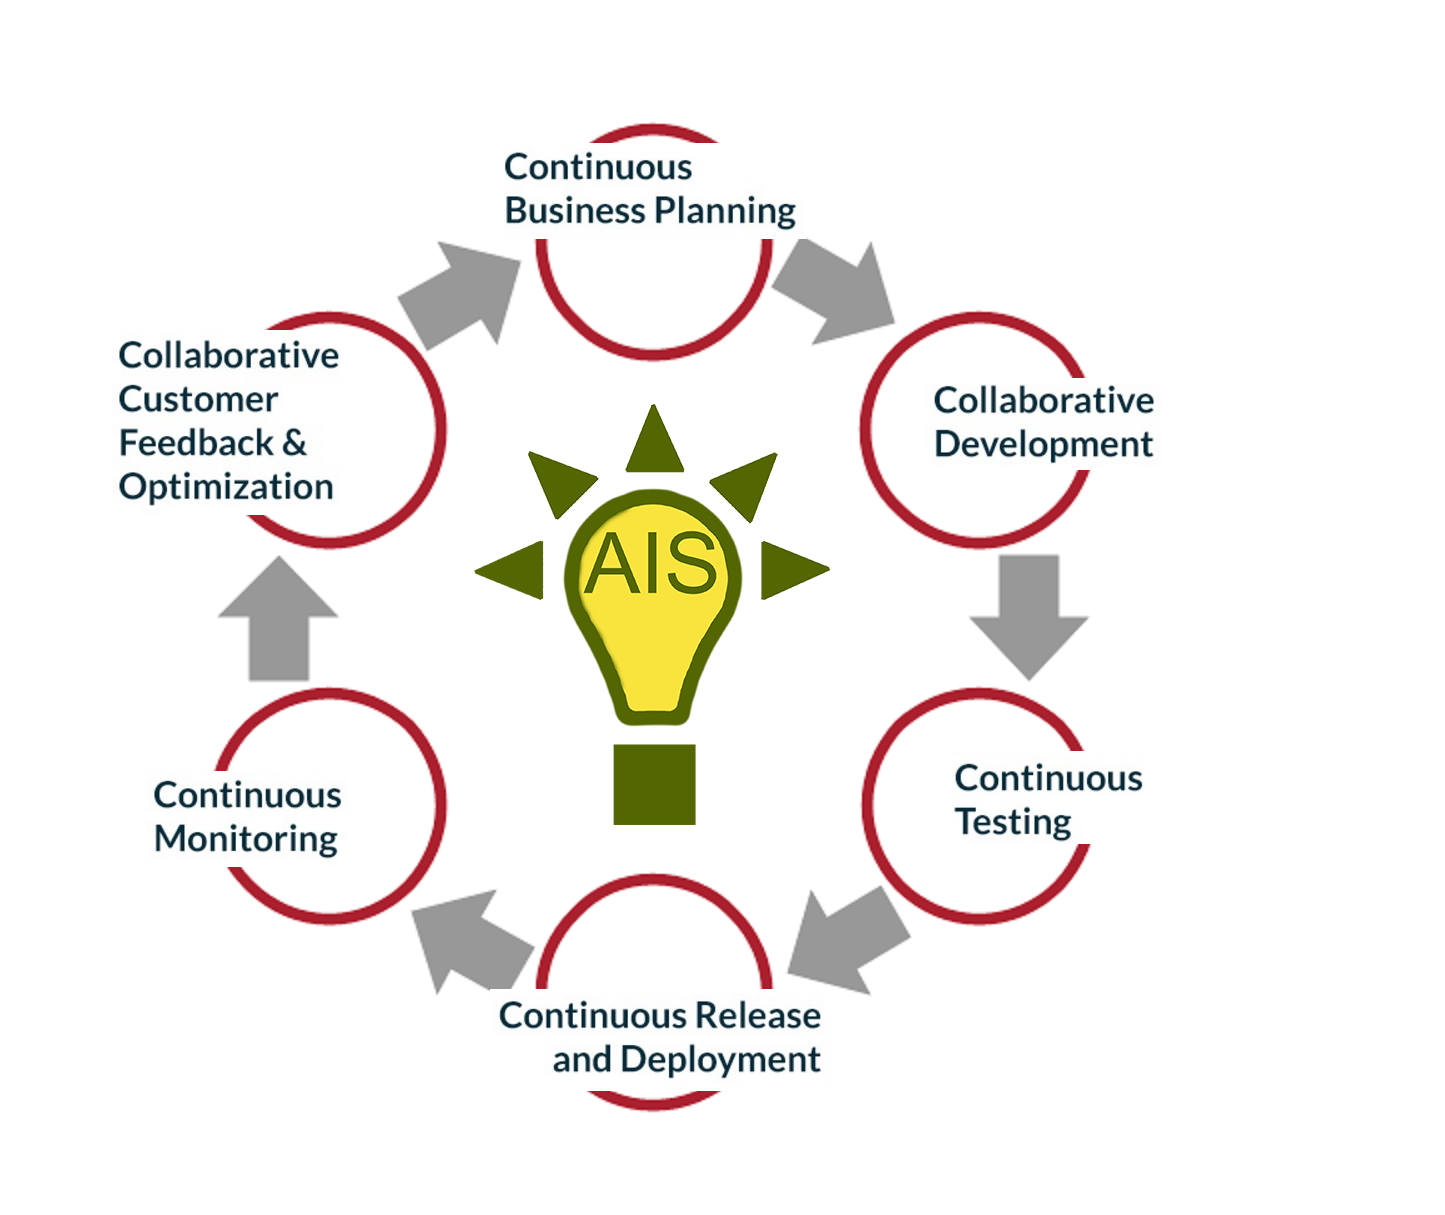 SDSI Cycle of Continuous Business Planning, Collaborative Development, Continuous Testing, Continuous Release and Deployment, Continuous Monitoring, and Collaborative Customer Feedback & Optimization